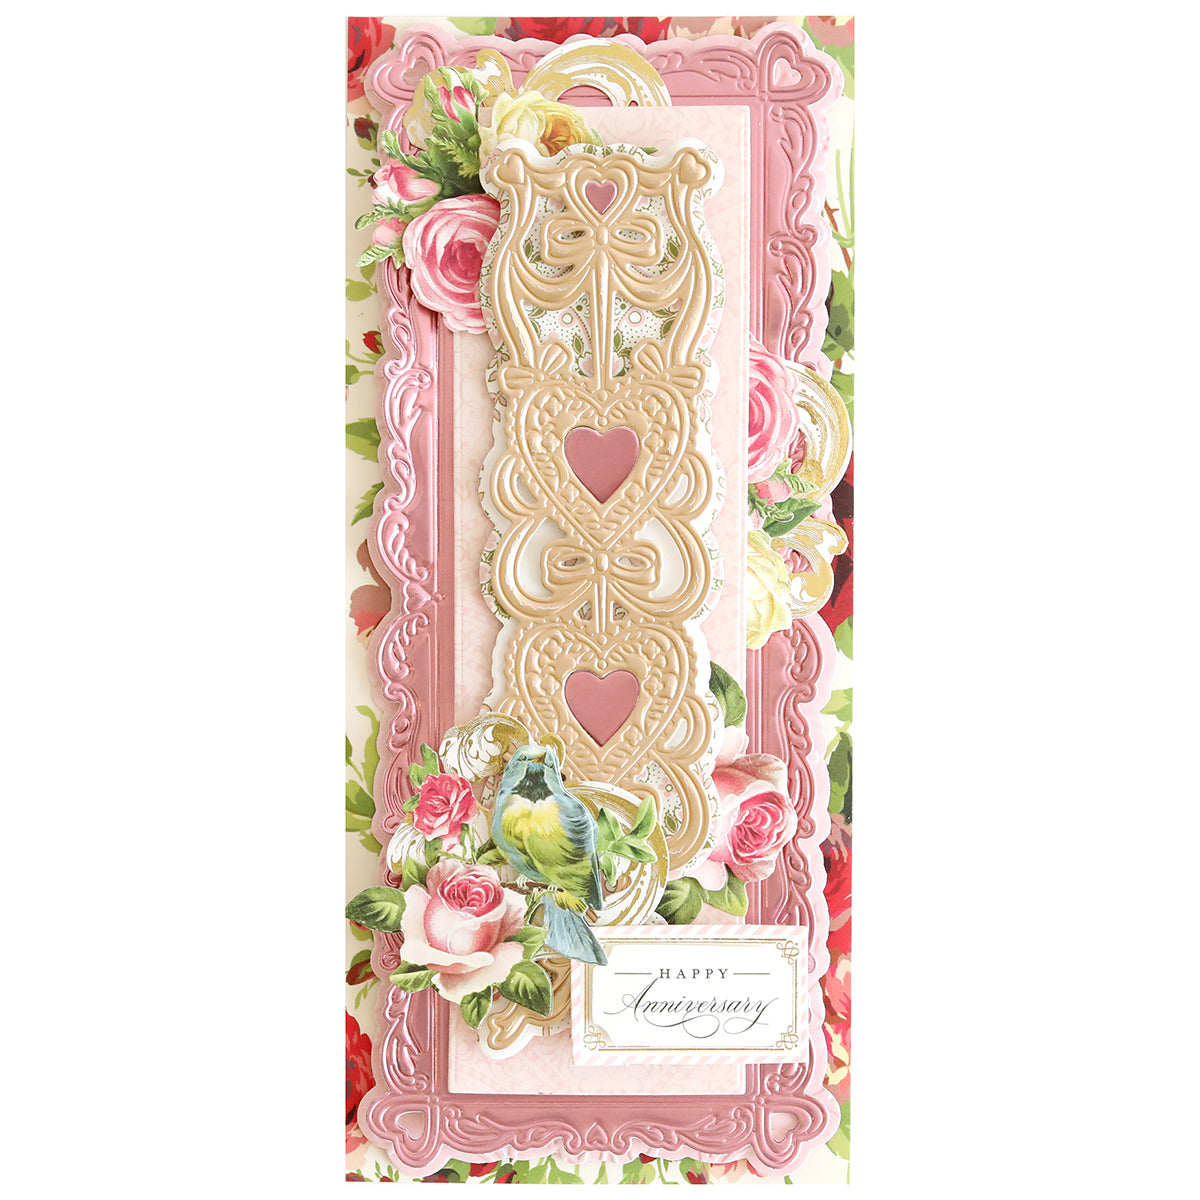 A Valentine's Day card adorned with beautiful roses and flowers, created using Ribbon of Hearts Slimline Dies, symbolizing love.